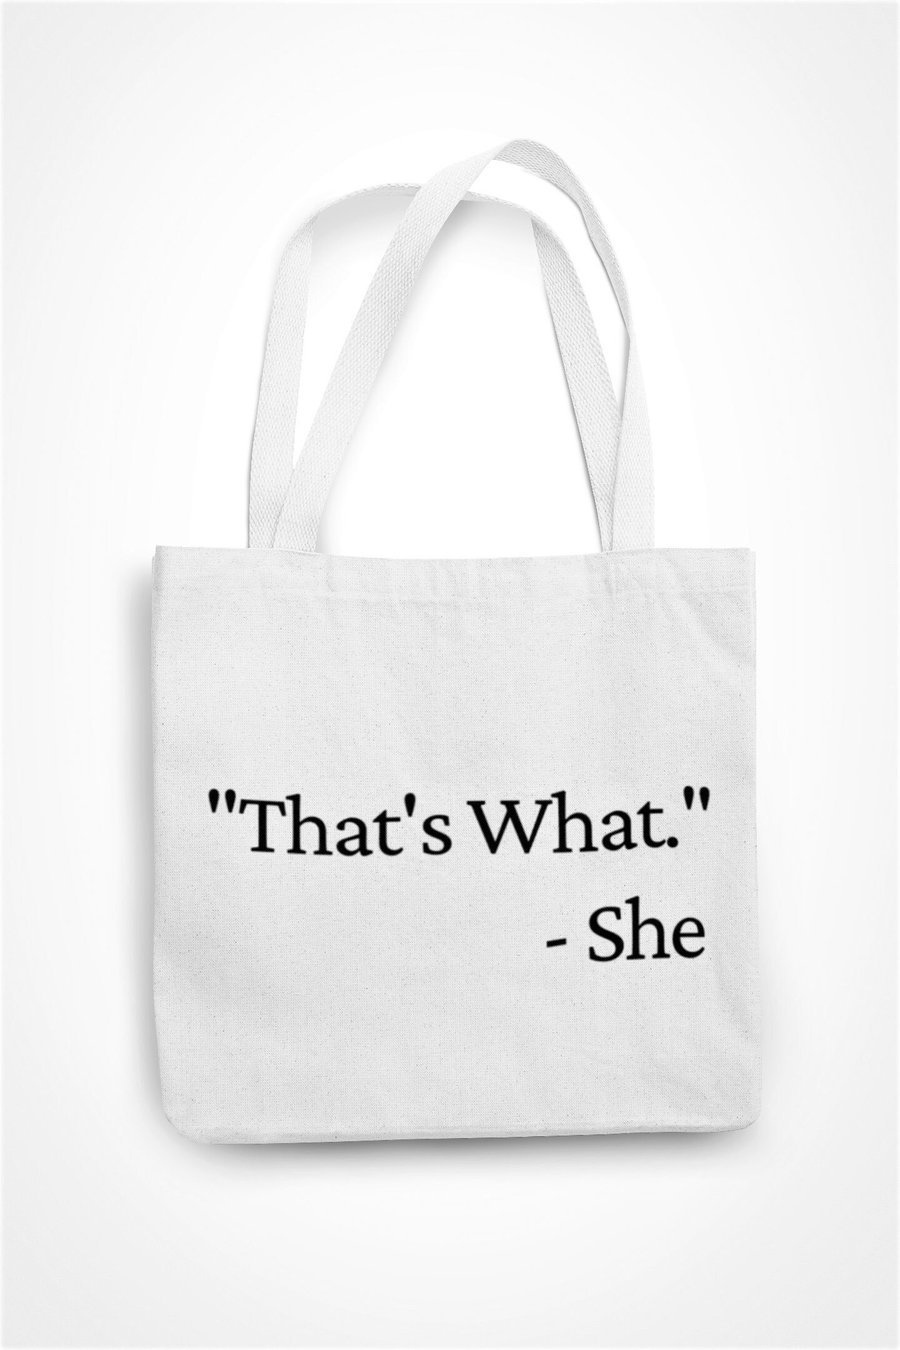 That's What She Said Tote Bag Funny Novelty Adult Humour Bag Funny Gift For Frie